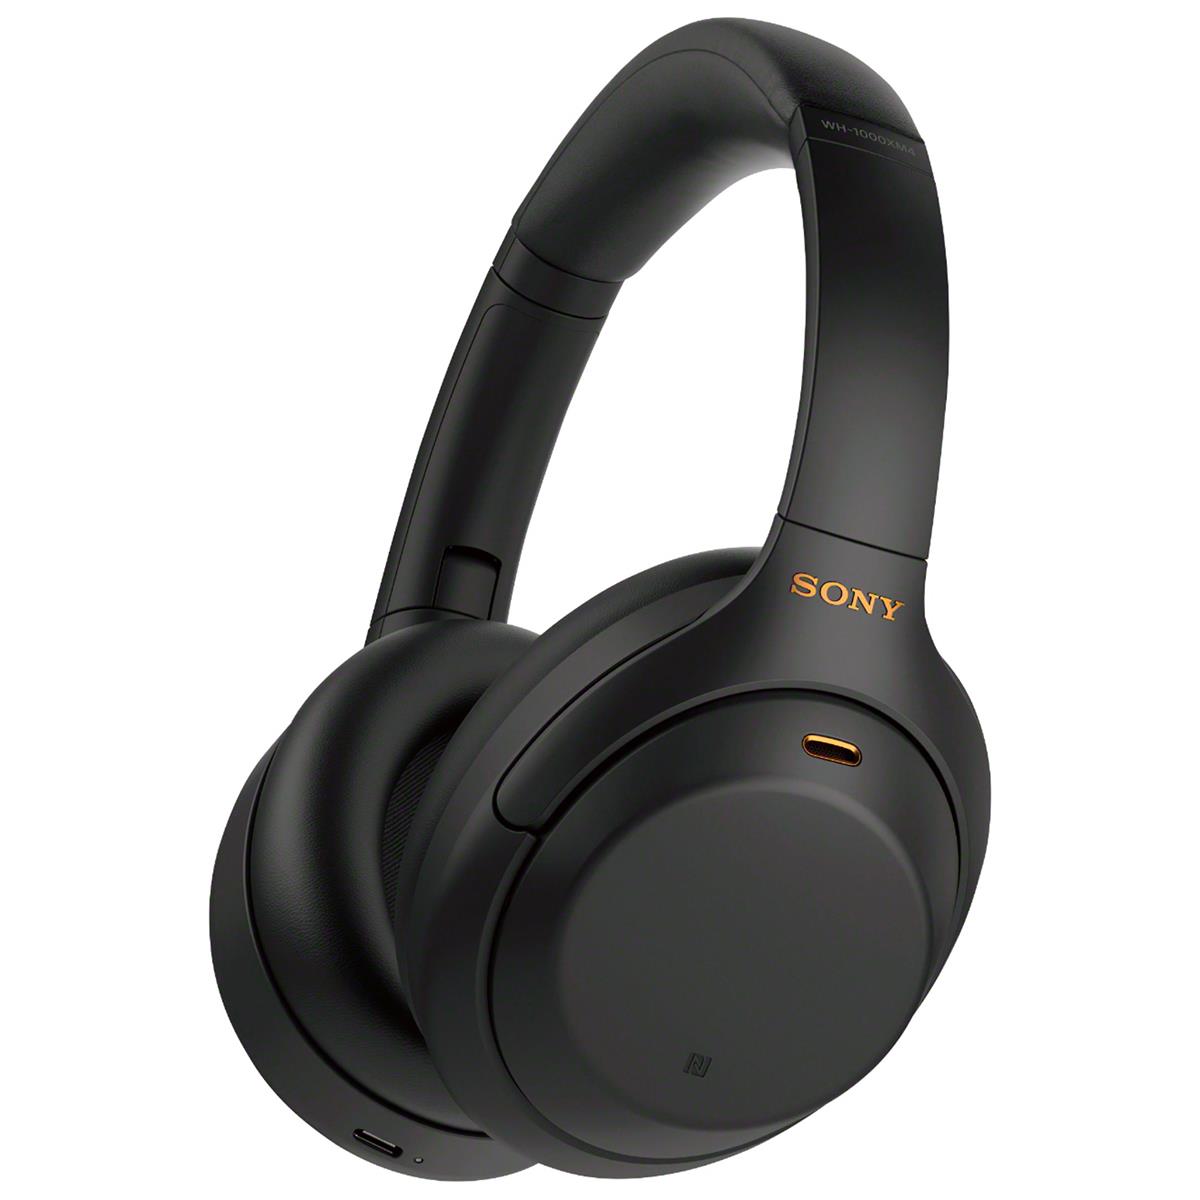 Image of Sony WH-1000XM4 Wireless Over the Ear Noise Cancelling Headphones